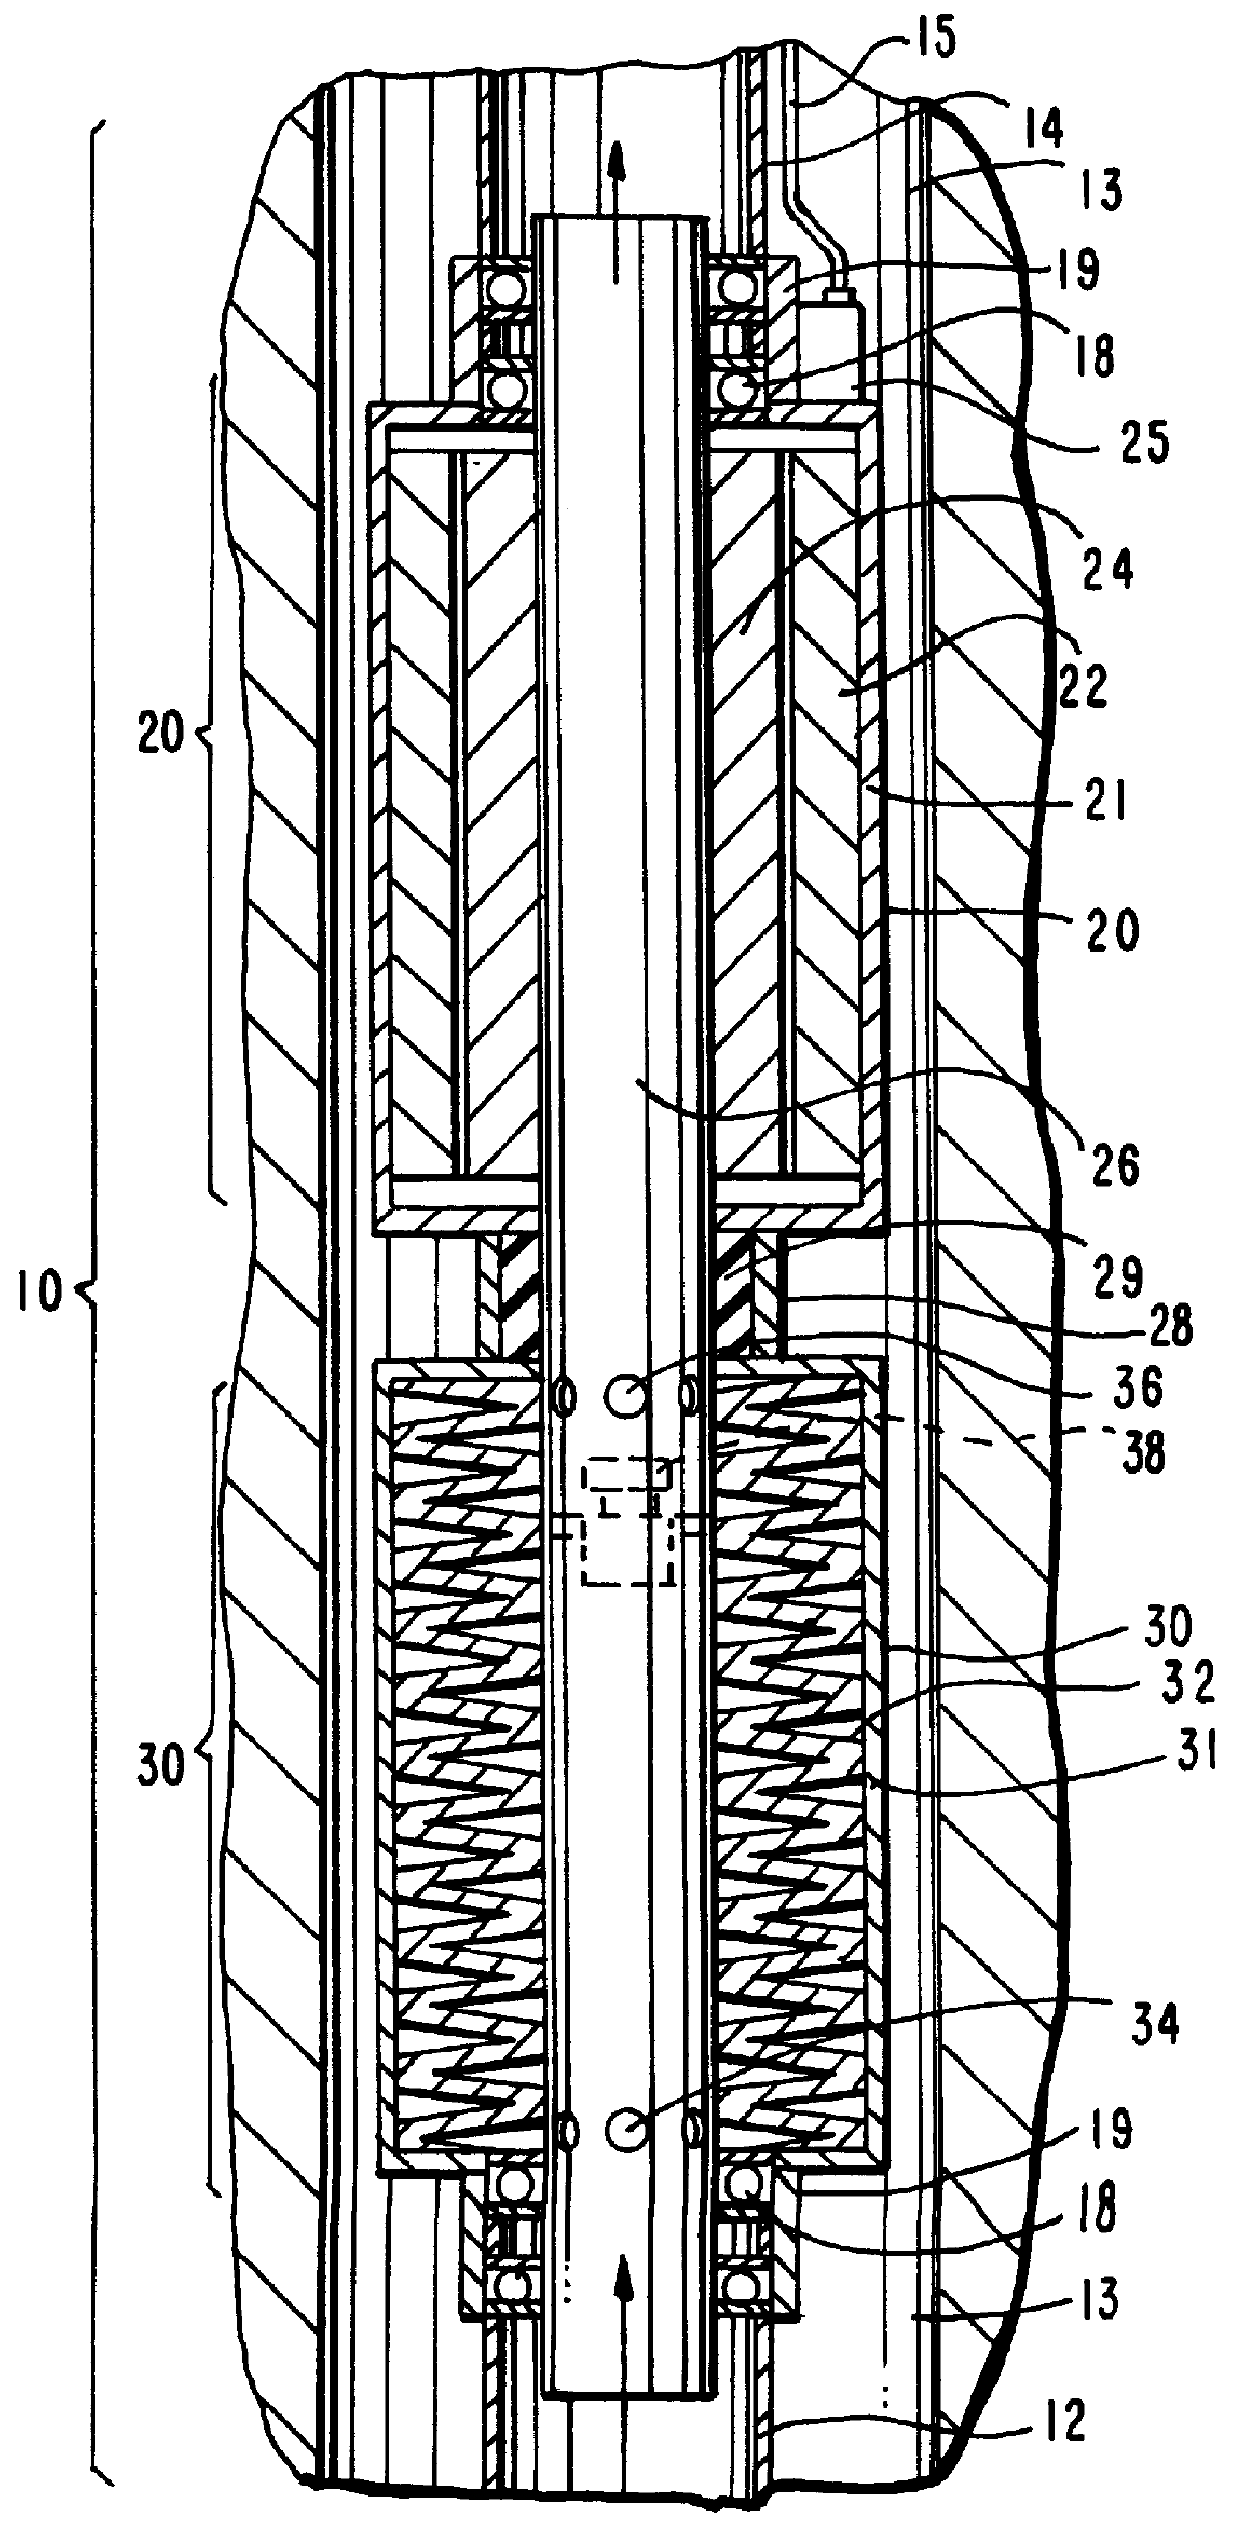 Electric submersible pump with hollow drive shaft